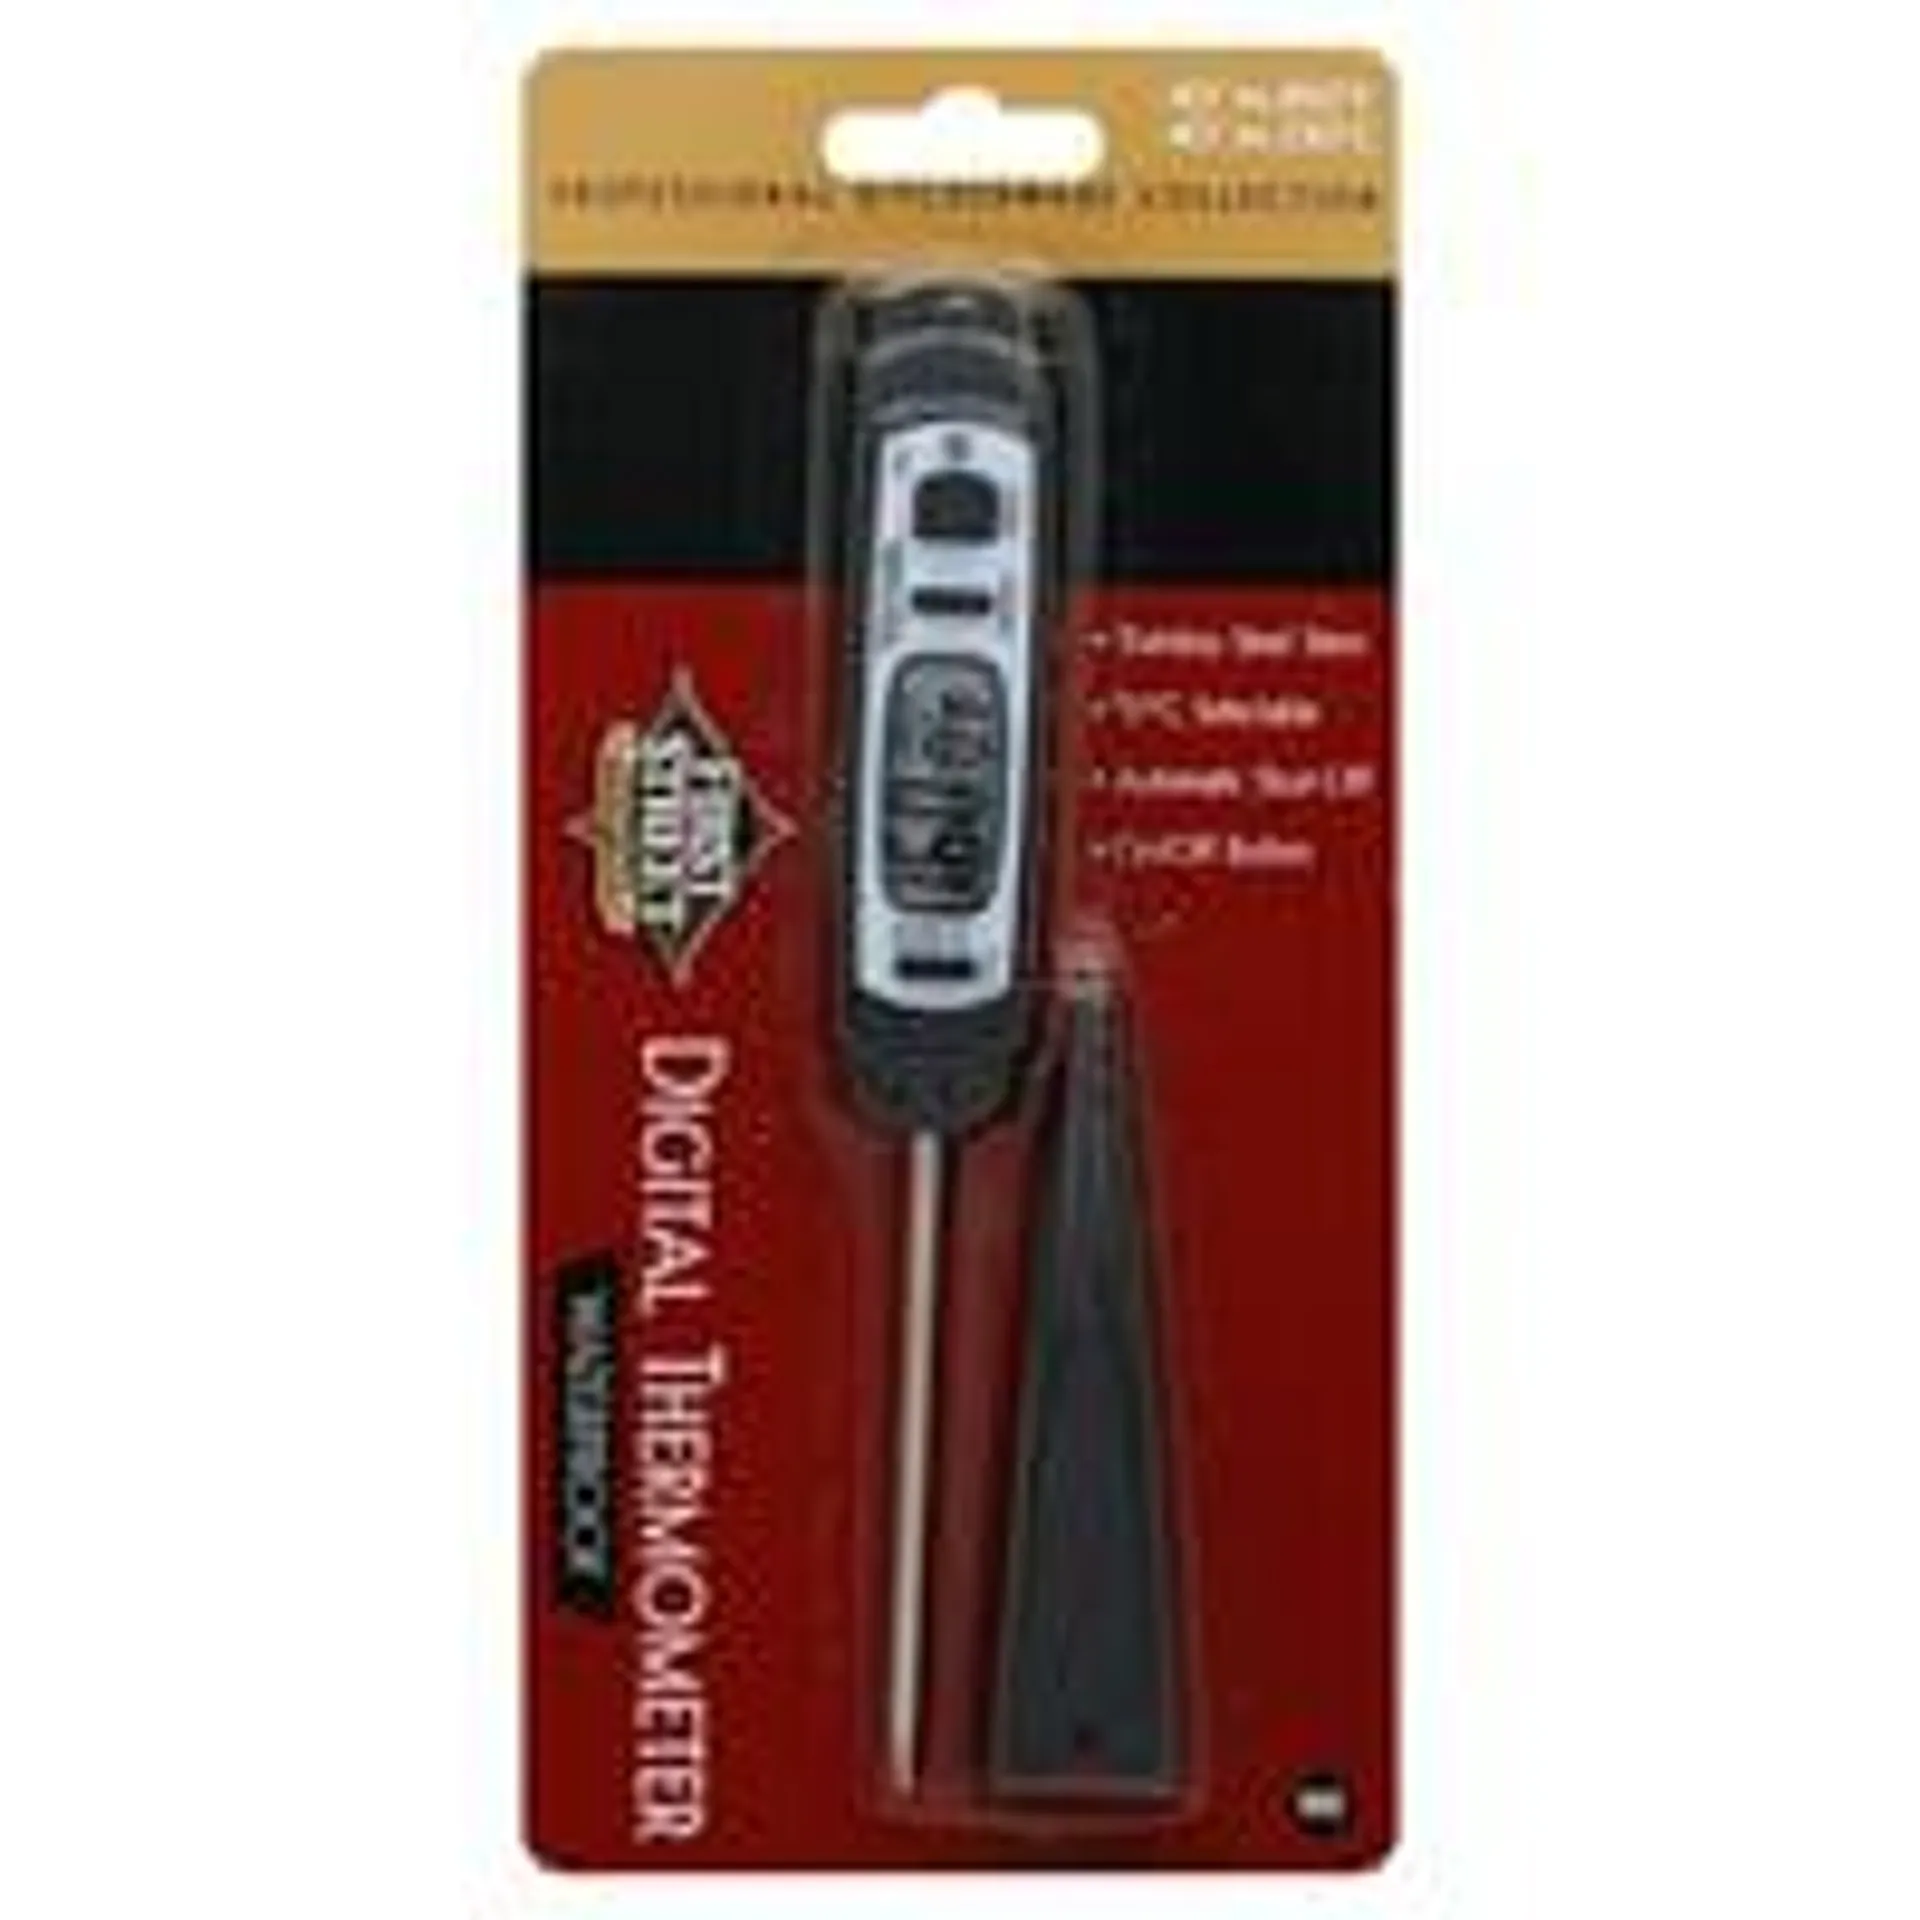 First Street/Taylor Waterproof Digital Thermometer 1 ct